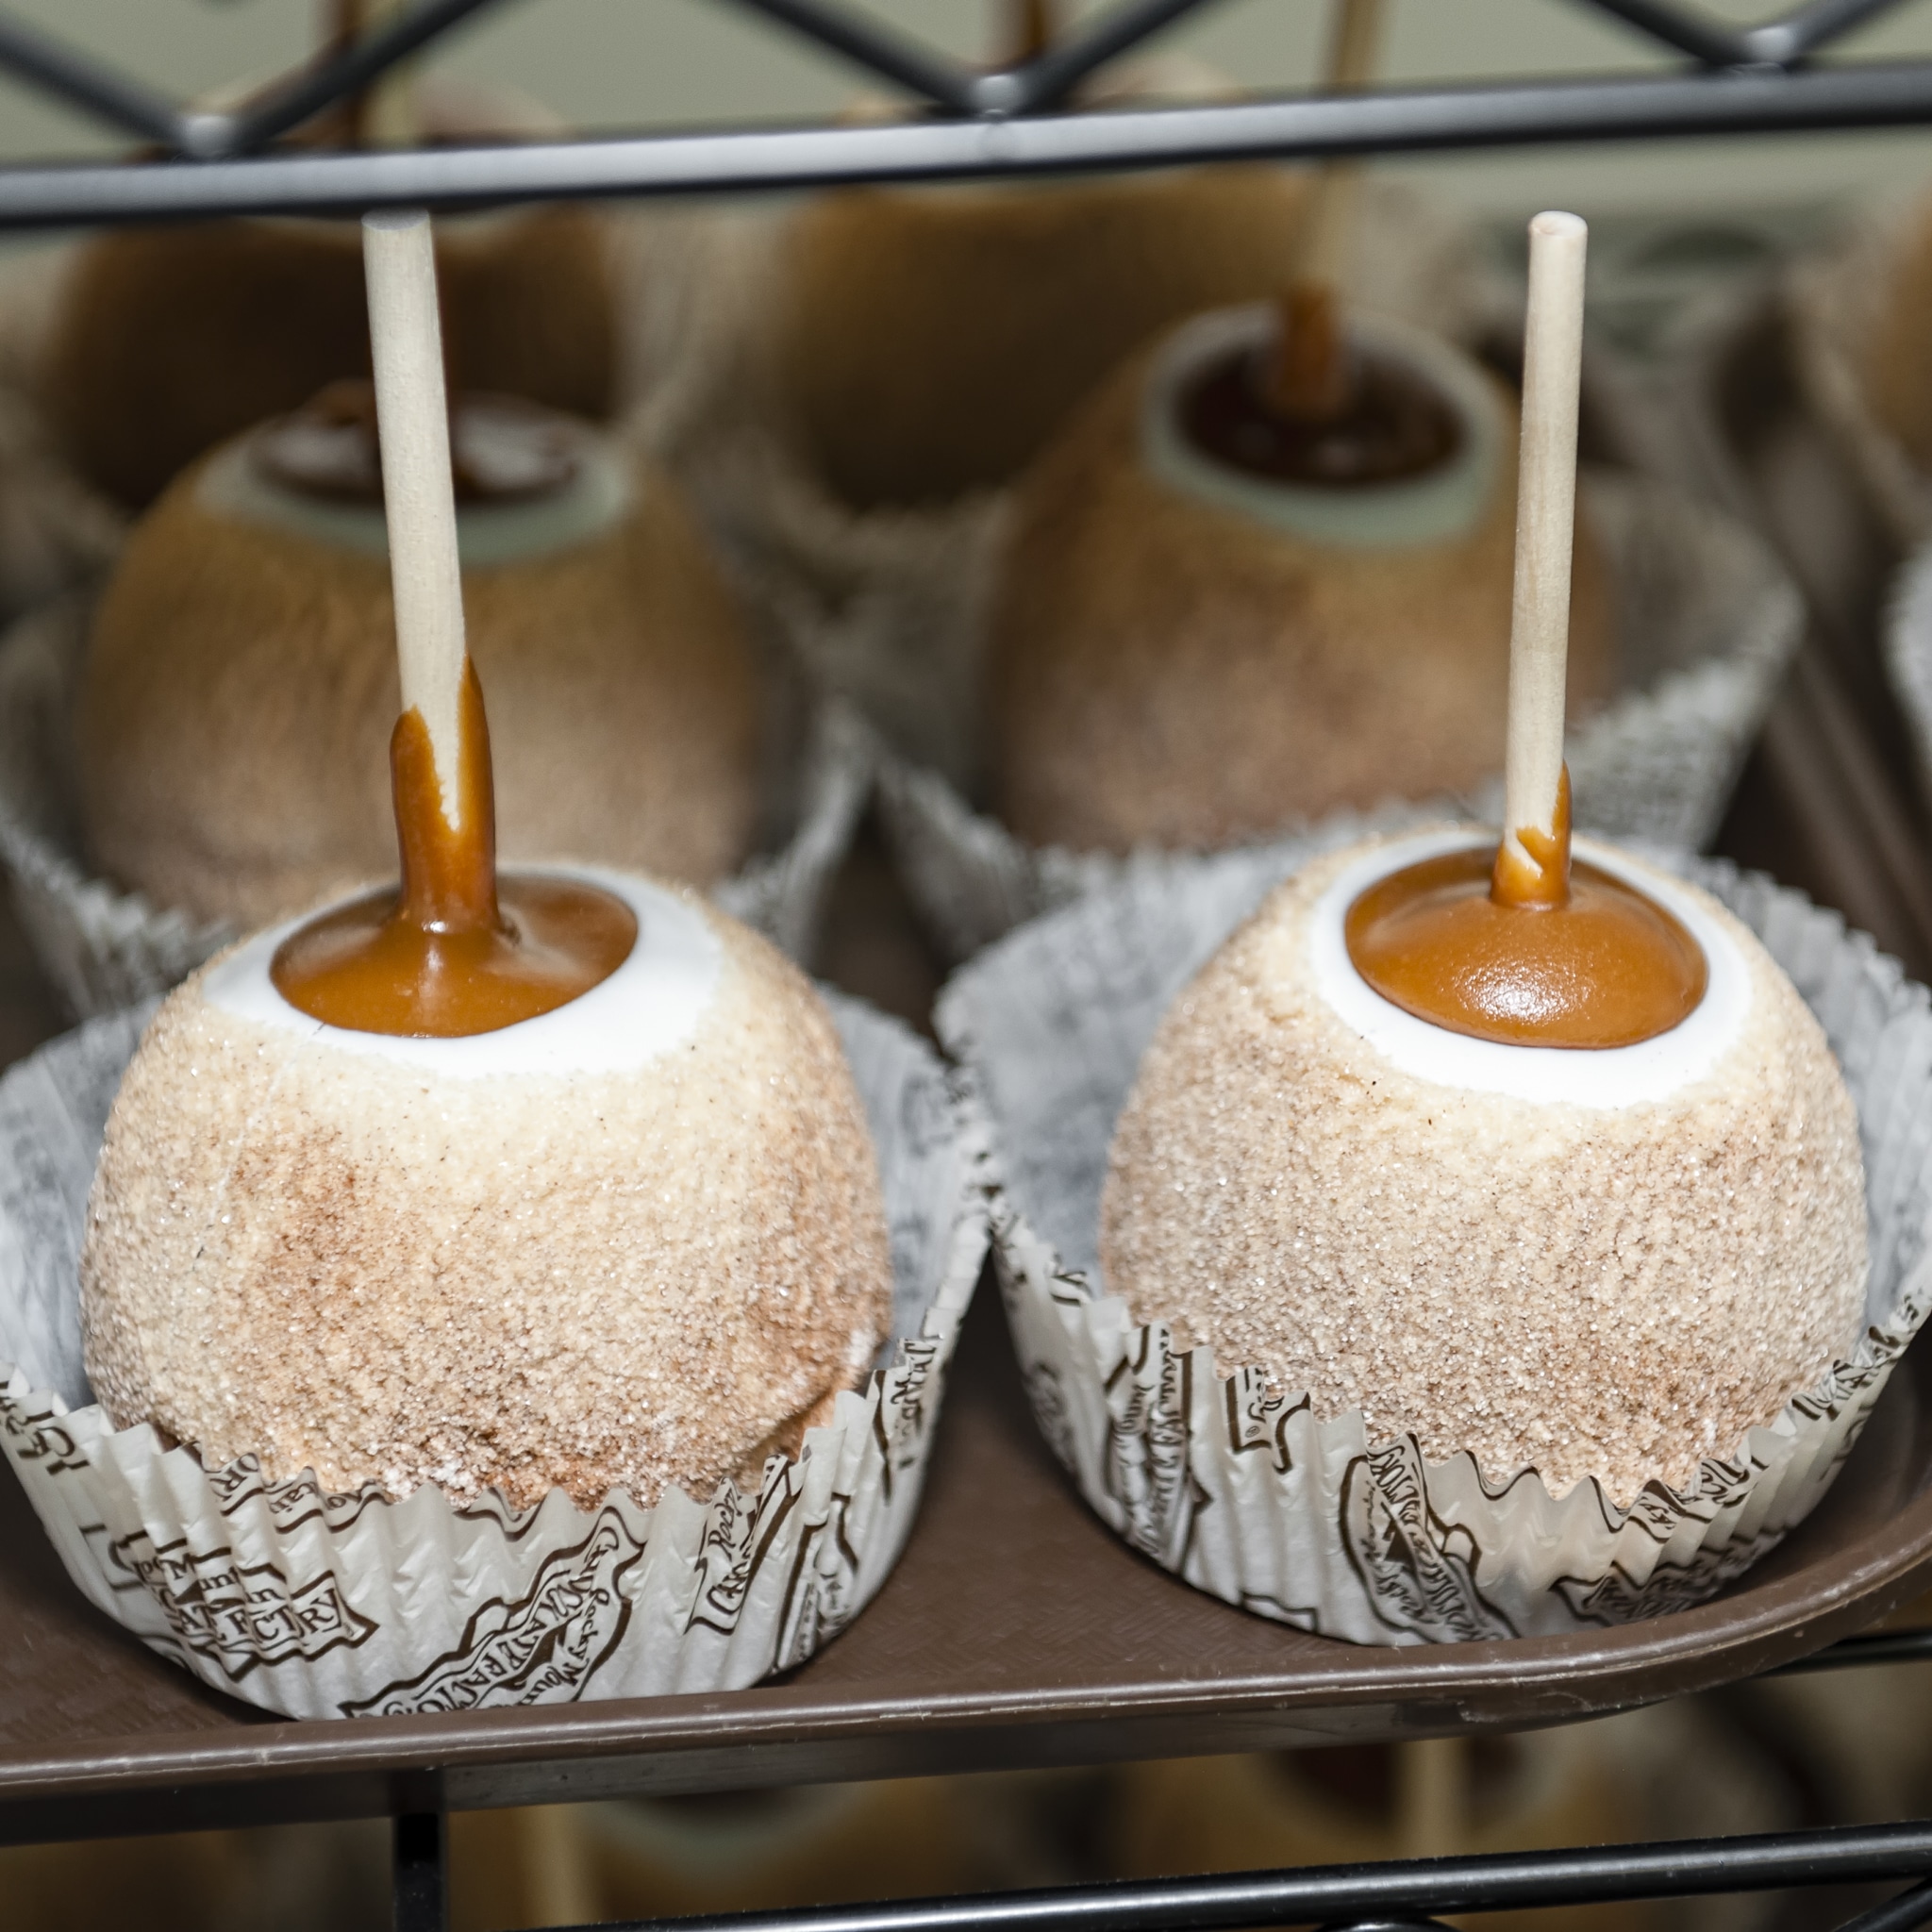 Two large caramel apples coated in sugar and available for the lifting with handy sticks coming out of the tops.